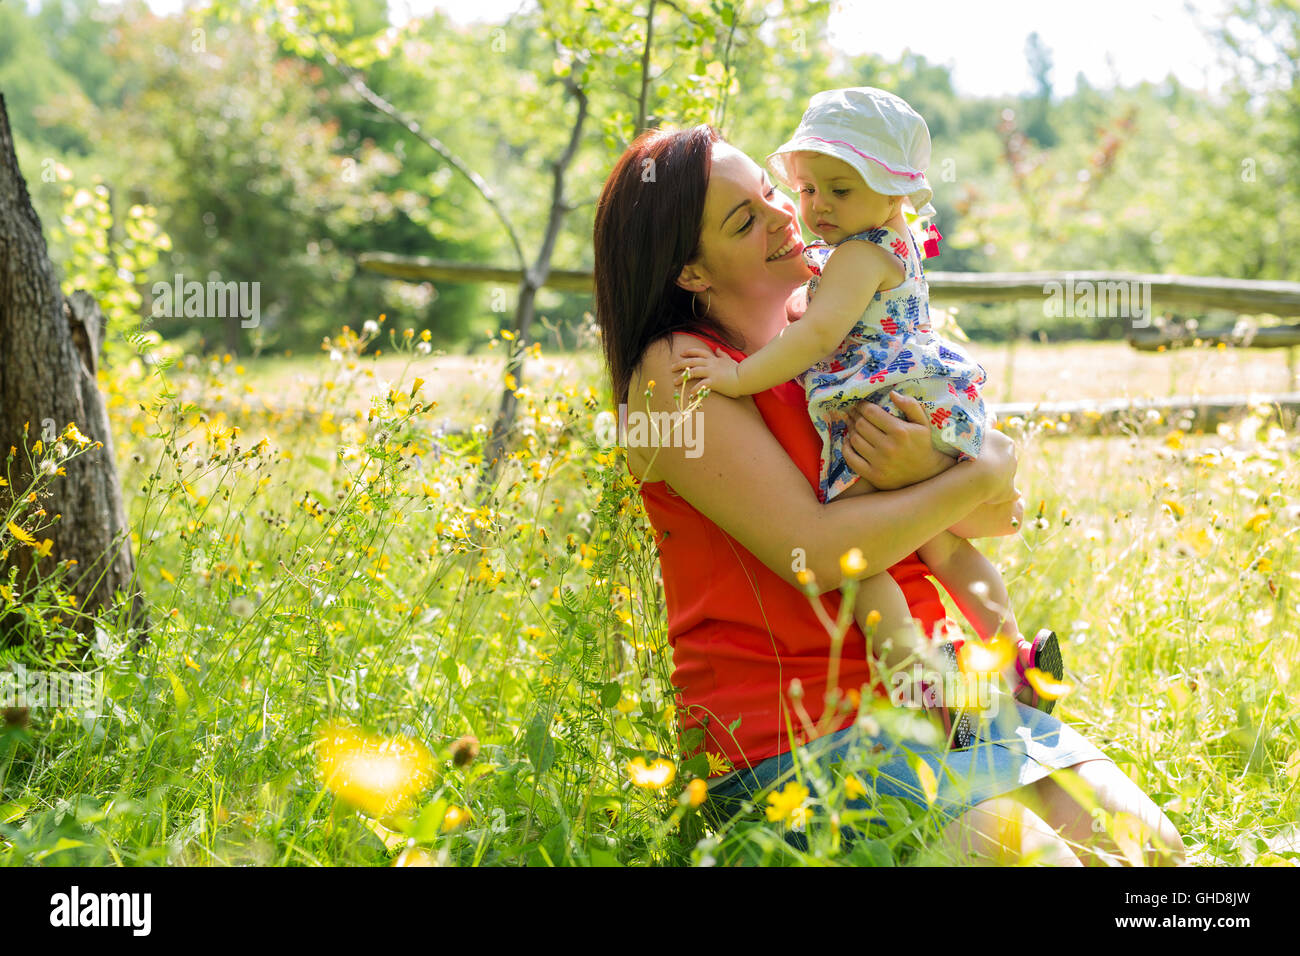 Mother and daughter in forest having fun Stock Photo